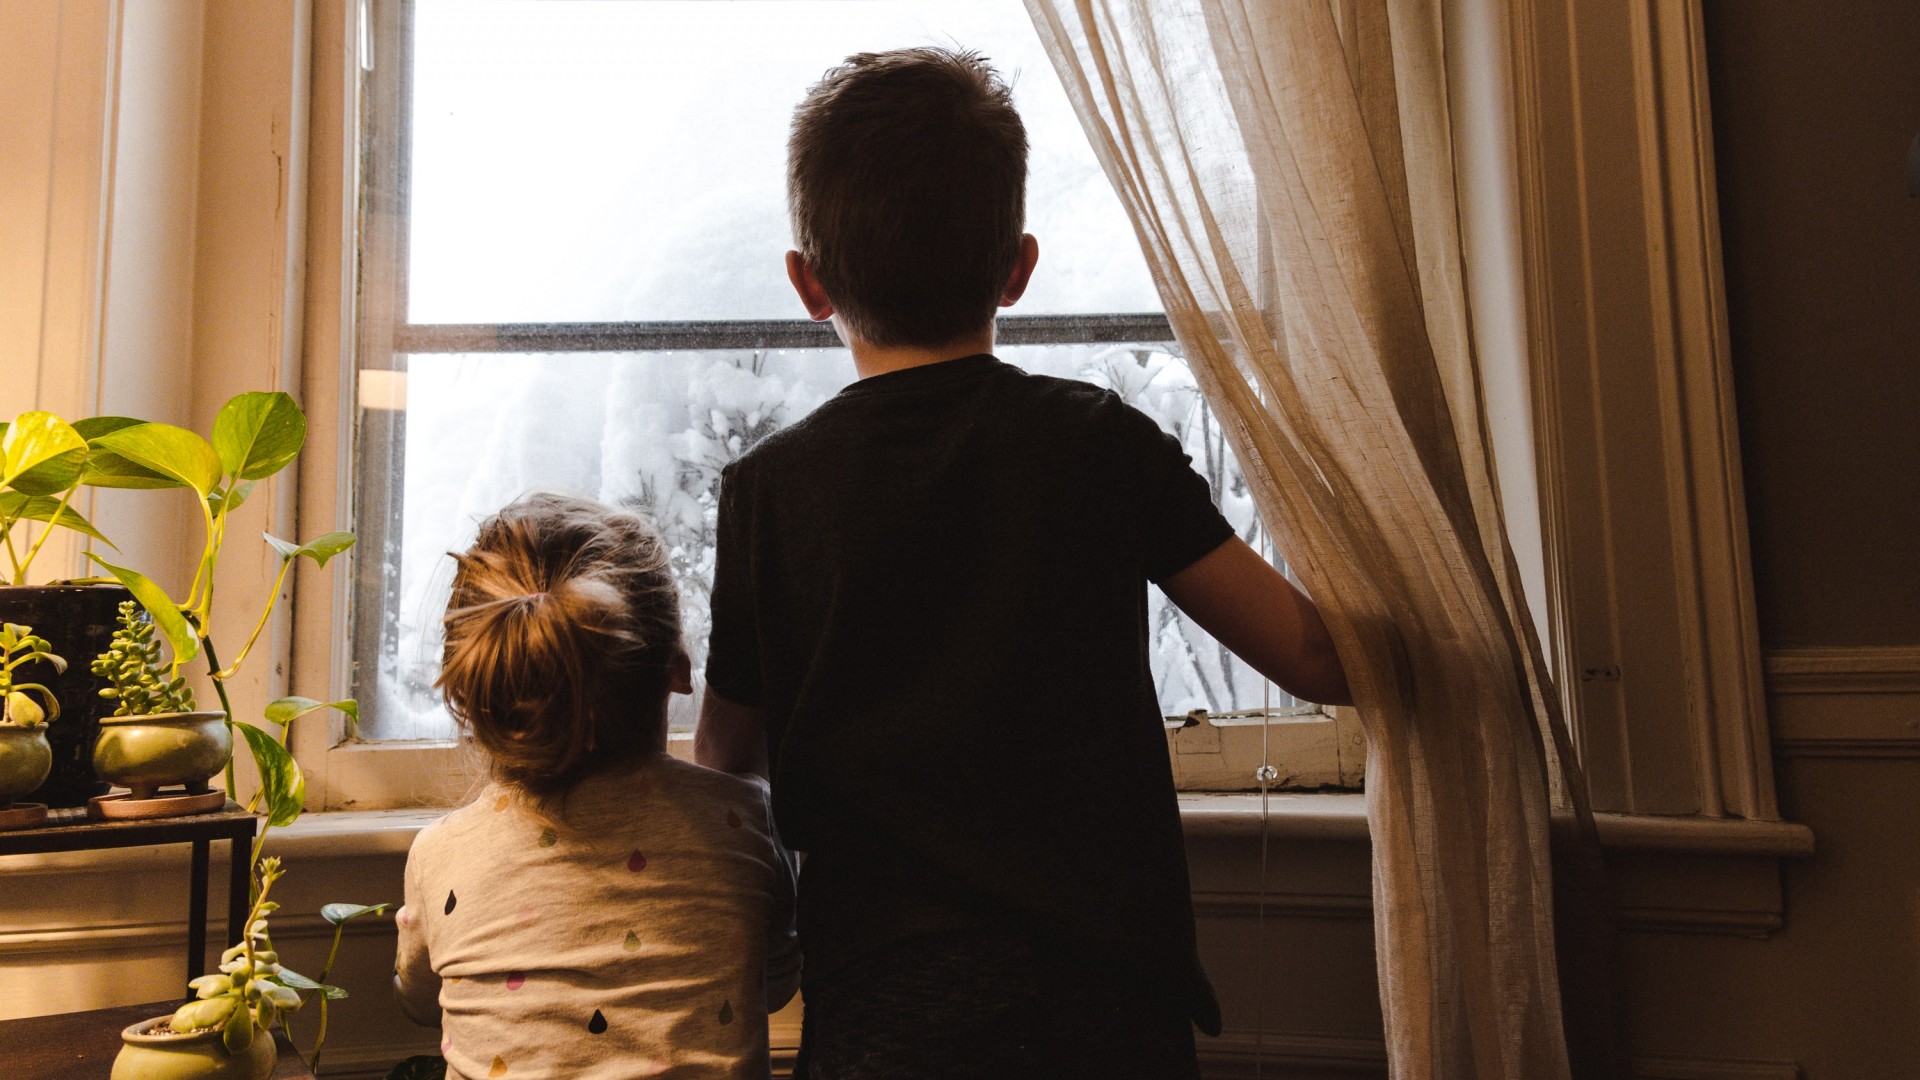 Two children looking out a window; Photo by Kelly Sikkema on Unsplash